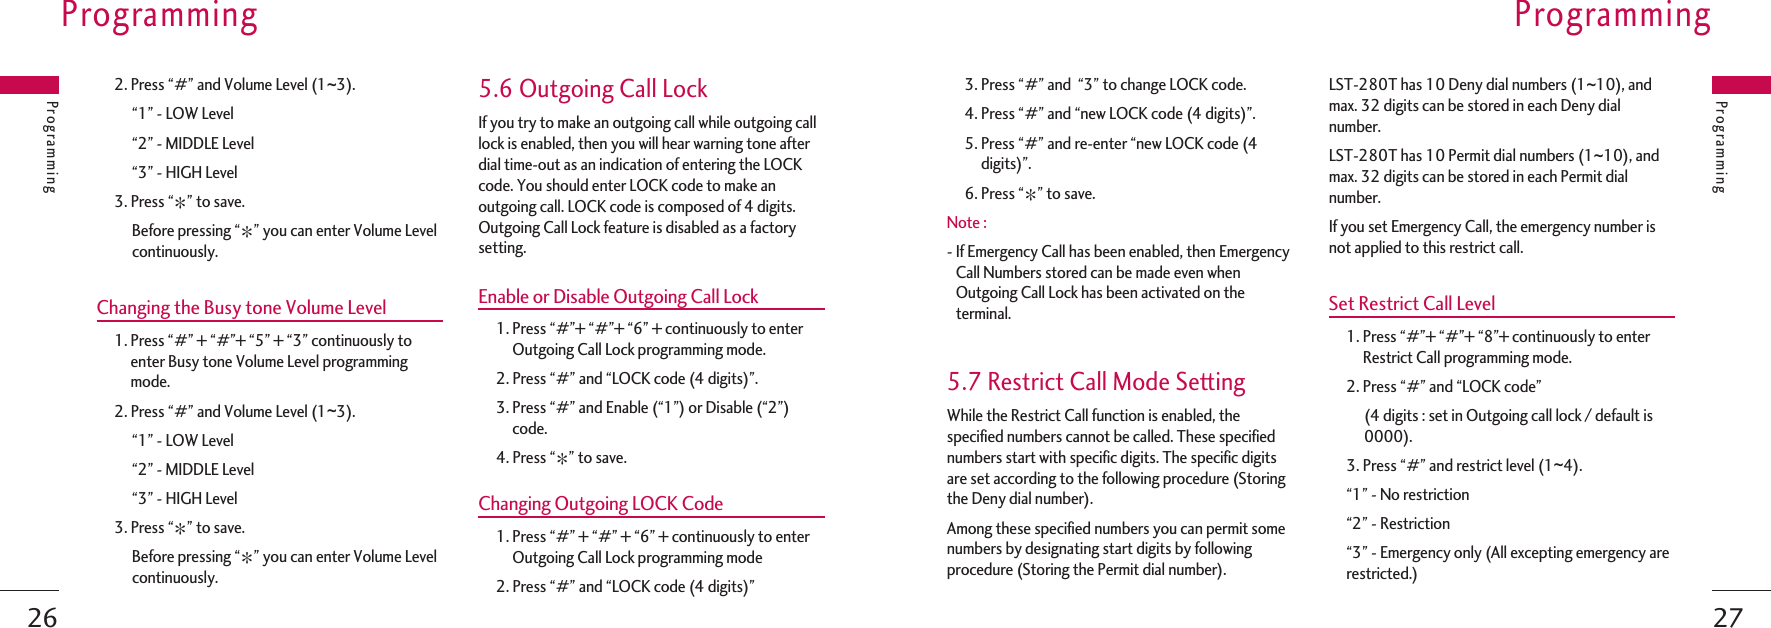 273. Press “#” and  “3” to change LOCK code.4. Press “#” and “new LOCK code (4 digits)”.5. Press “#” and re-enter “new LOCK code (4digits)”.6. Press “J” to save.Note :- If Emergency Call has been enabled, then EmergencyCall Numbers stored can be made even whenOutgoing Call Lock has been activated on theterminal.5.7 Restrict Call Mode SettingWhile the Restrict Call function is enabled, thespecified numbers cannot be called. These specifiednumbers start with specific digits. The specific digitsare set according to the following procedure (Storingthe Deny dial number).Among these specified numbers you can permit somenumbers by designating start digits by followingprocedure (Storing the Permit dial number).LST-280T has 10 Deny dial numbers (1~10), andmax. 32 digits can be stored in each Deny dialnumber.LST-280T has 10 Permit dial numbers (1~10), andmax. 32 digits can be stored in each Permit dialnumber.If you set Emergency Call, the emergency number isnot applied to this restrict call.Set Restrict Call Level1. Press “#”+ “#”+ “8”+ continuously to enterRestrict Call programming mode.2. Press “#” and “LOCK code”(4 digits : set in Outgoing call lock / default is0000).3. Press “#” and restrict level (1~4).“1” - No restriction“2” - Restriction“3” - Emergency only (All excepting emergency arerestricted.)ProgrammingProgramming262. Press “#” and Volume Level (1~3).“1” - LOW Level“2” - MIDDLE Level“3” - HIGH Level3. Press “J” to save.Before pressing “J” you can enter Volume Levelcontinuously.Changing the Busy tone Volume Level1. Press “#” + “#”+ “5” + “3” continuously toenter Busy tone Volume Level programmingmode.2. Press “#” and Volume Level (1~3).“1” - LOW Level“2” - MIDDLE Level“3” - HIGH Level3. Press “J” to save.Before pressing “J” you can enter Volume Levelcontinuously.5.6 Outgoing Call LockIf you try to make an outgoing call while outgoing calllock is enabled, then you will hear warning tone afterdial time-out as an indication of entering the LOCKcode. You should enter LOCK code to make anoutgoing call. LOCK code is composed of 4 digits.Outgoing Call Lock feature is disabled as a factorysetting.Enable or Disable Outgoing Call Lock1. Press “#”+ “#”+ “6” + continuously to enterOutgoing Call Lock programming mode.2. Press “#” and “LOCK code (4 digits)”.3. Press “#” and Enable (“1”) or Disable (“2”)code.4. Press “J” to save.Changing Outgoing LOCK Code1. Press “#” + “#” + “6” + continuously to enterOutgoing Call Lock programming mode2. Press “#” and “LOCK code (4 digits)”ProgrammingProgramming